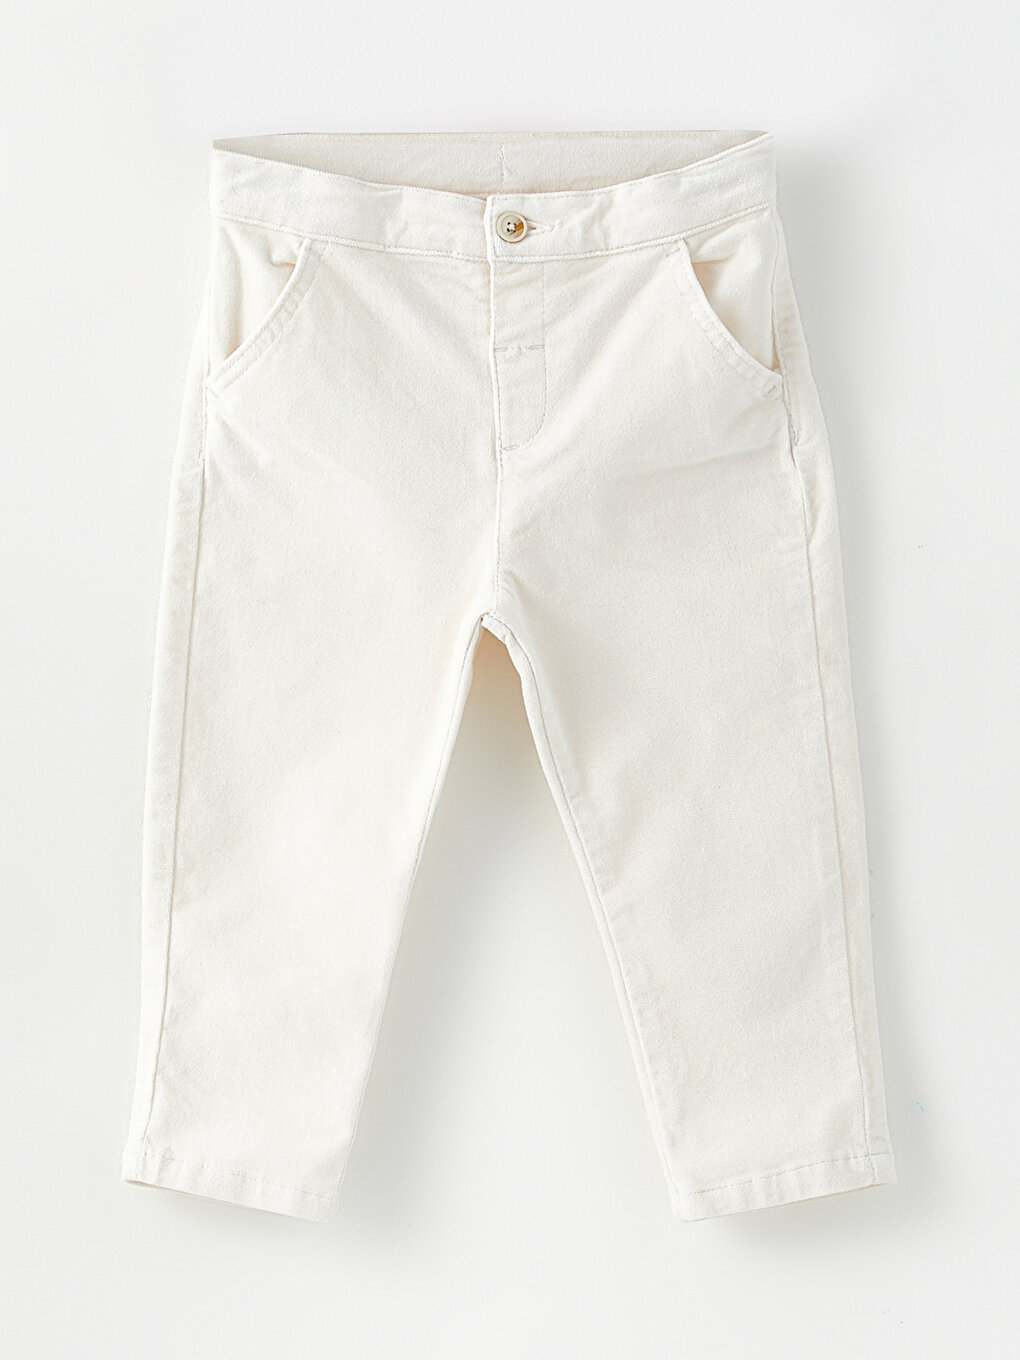 Buy Boy White Linen Pants Shirt Toddler Boy Pants Outfit Baby Boy Online in  India  Etsy